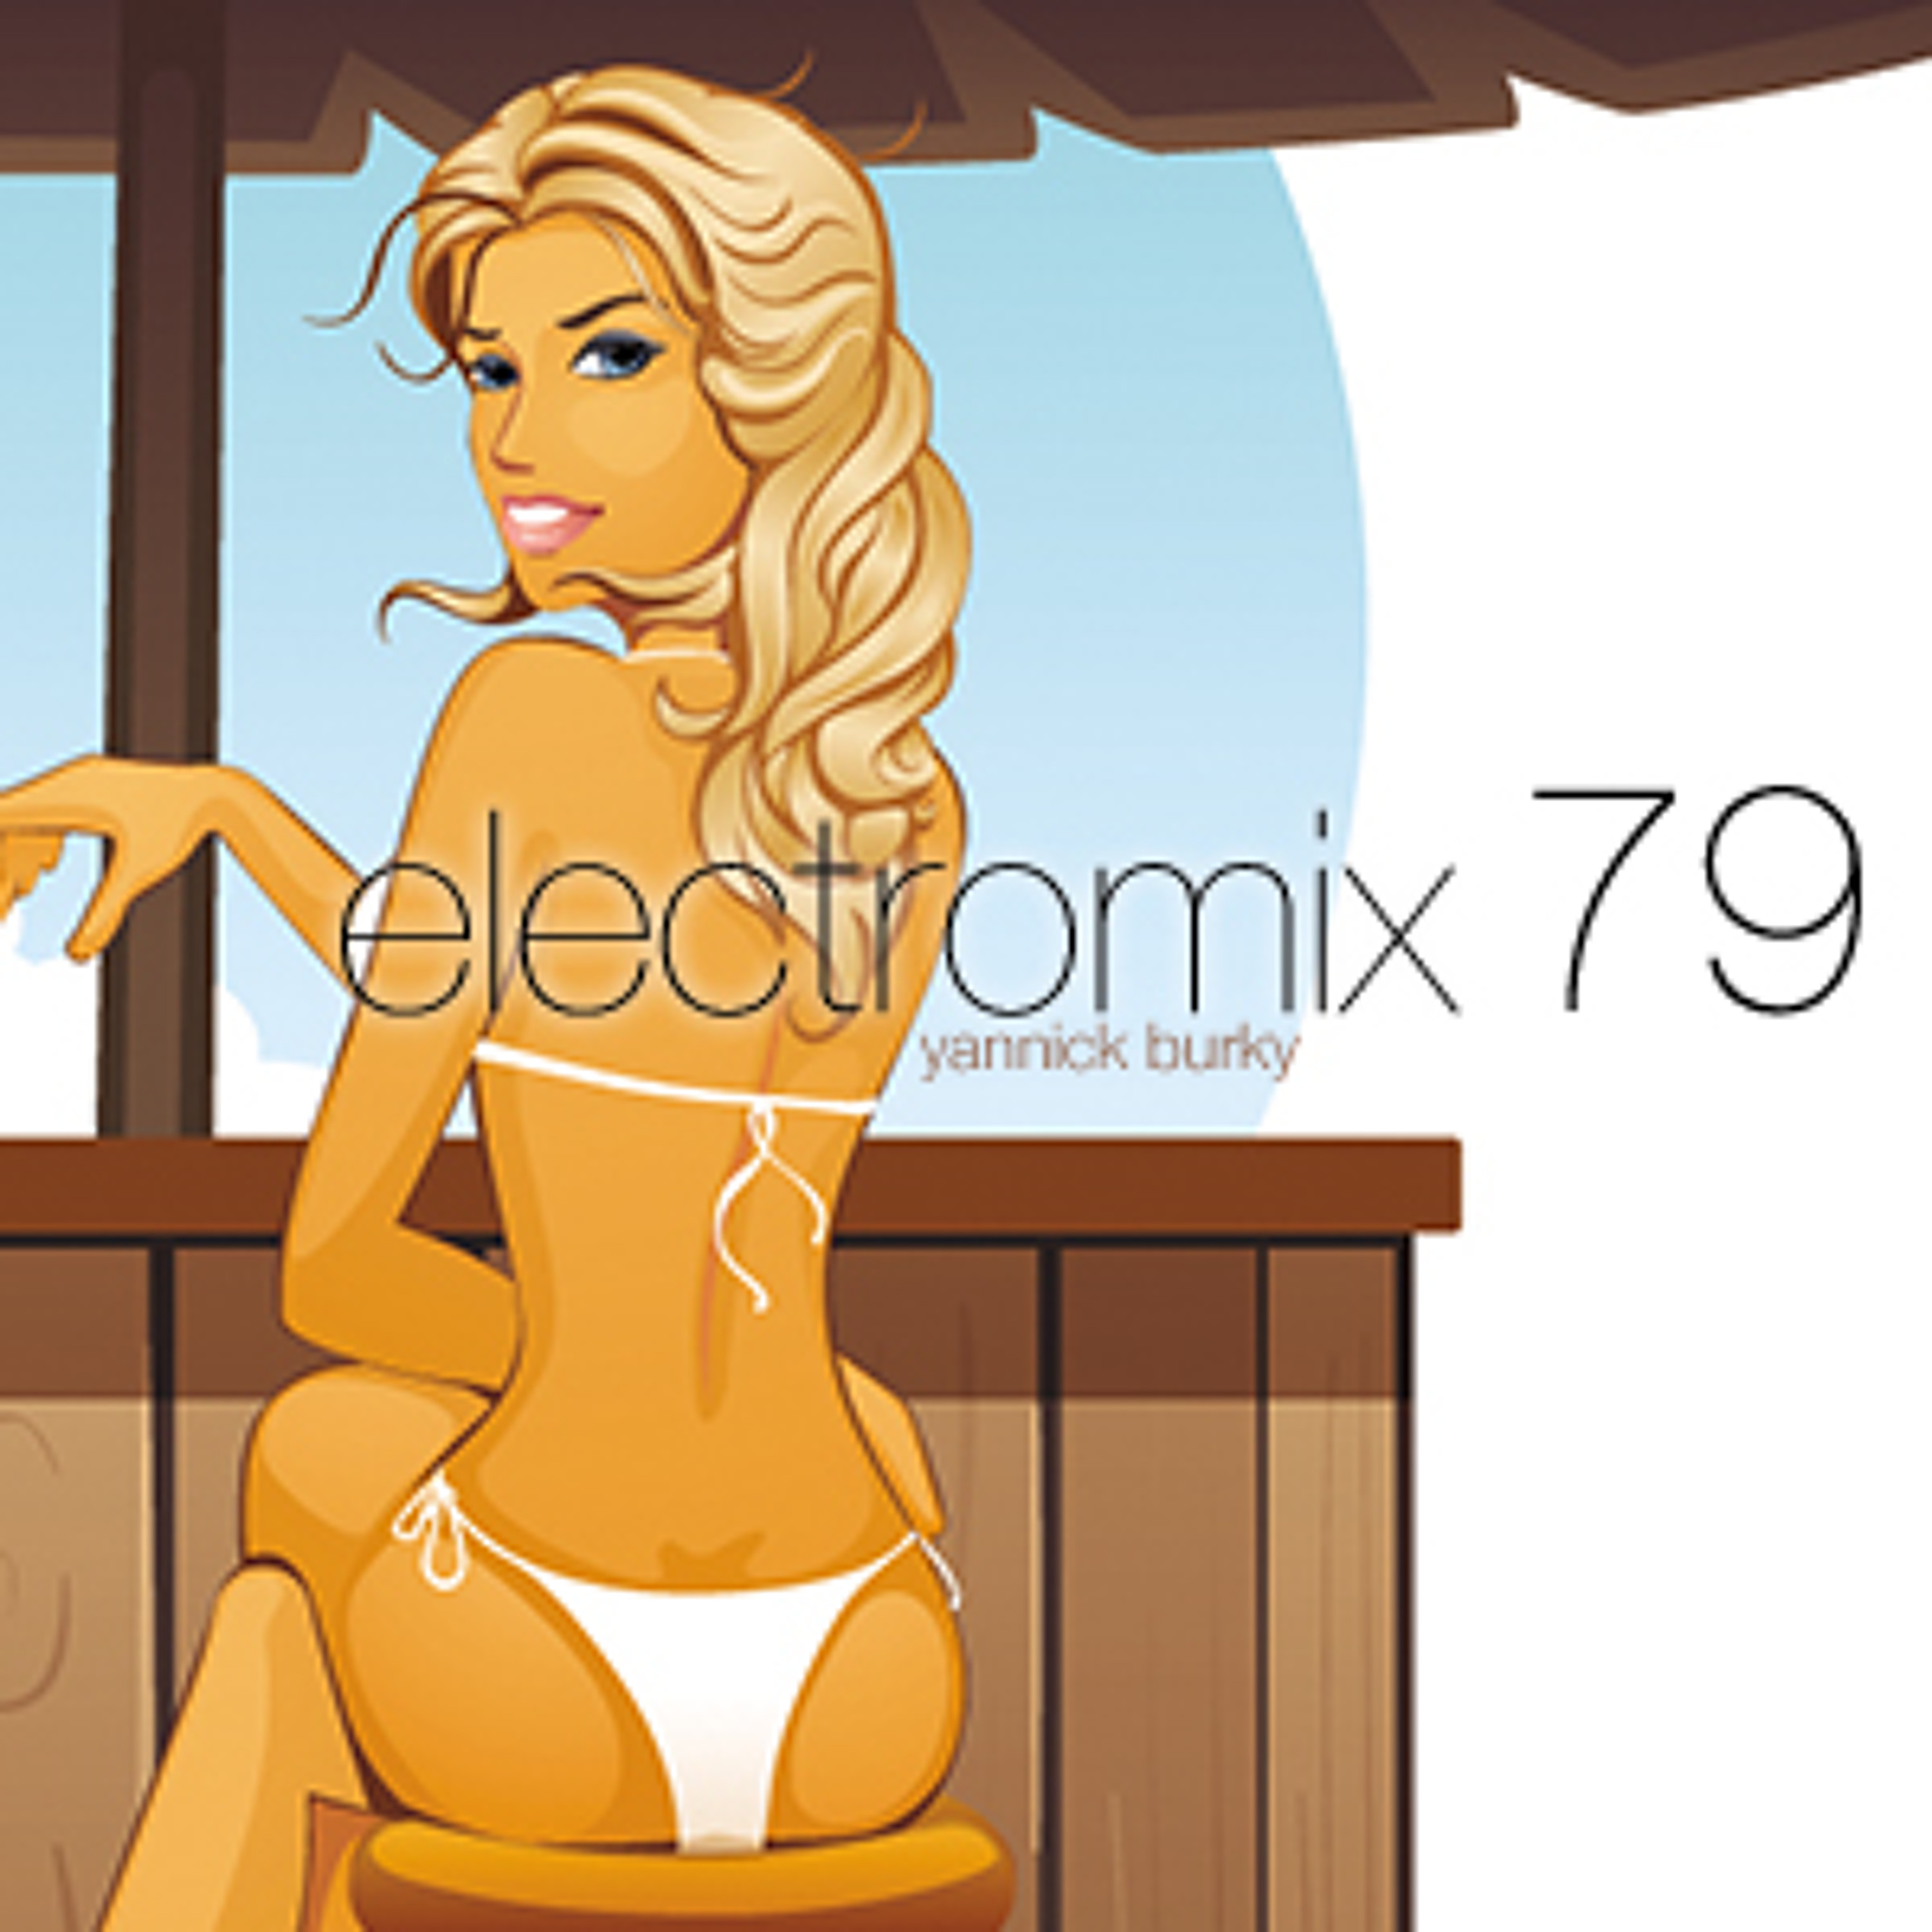 electromix 79 • House Music